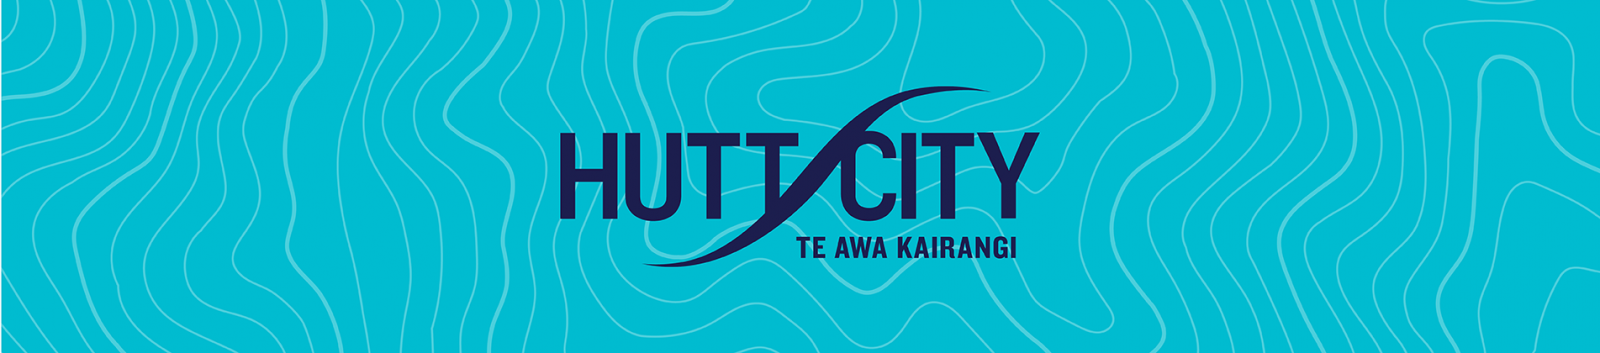 Hutt City written in dark blue with a representation of the river between Hutt and City. In smaller dark blue text below is Te Awa Kairangi. The logo is presented on a mid-blue background with light blue topographical markings. banner image